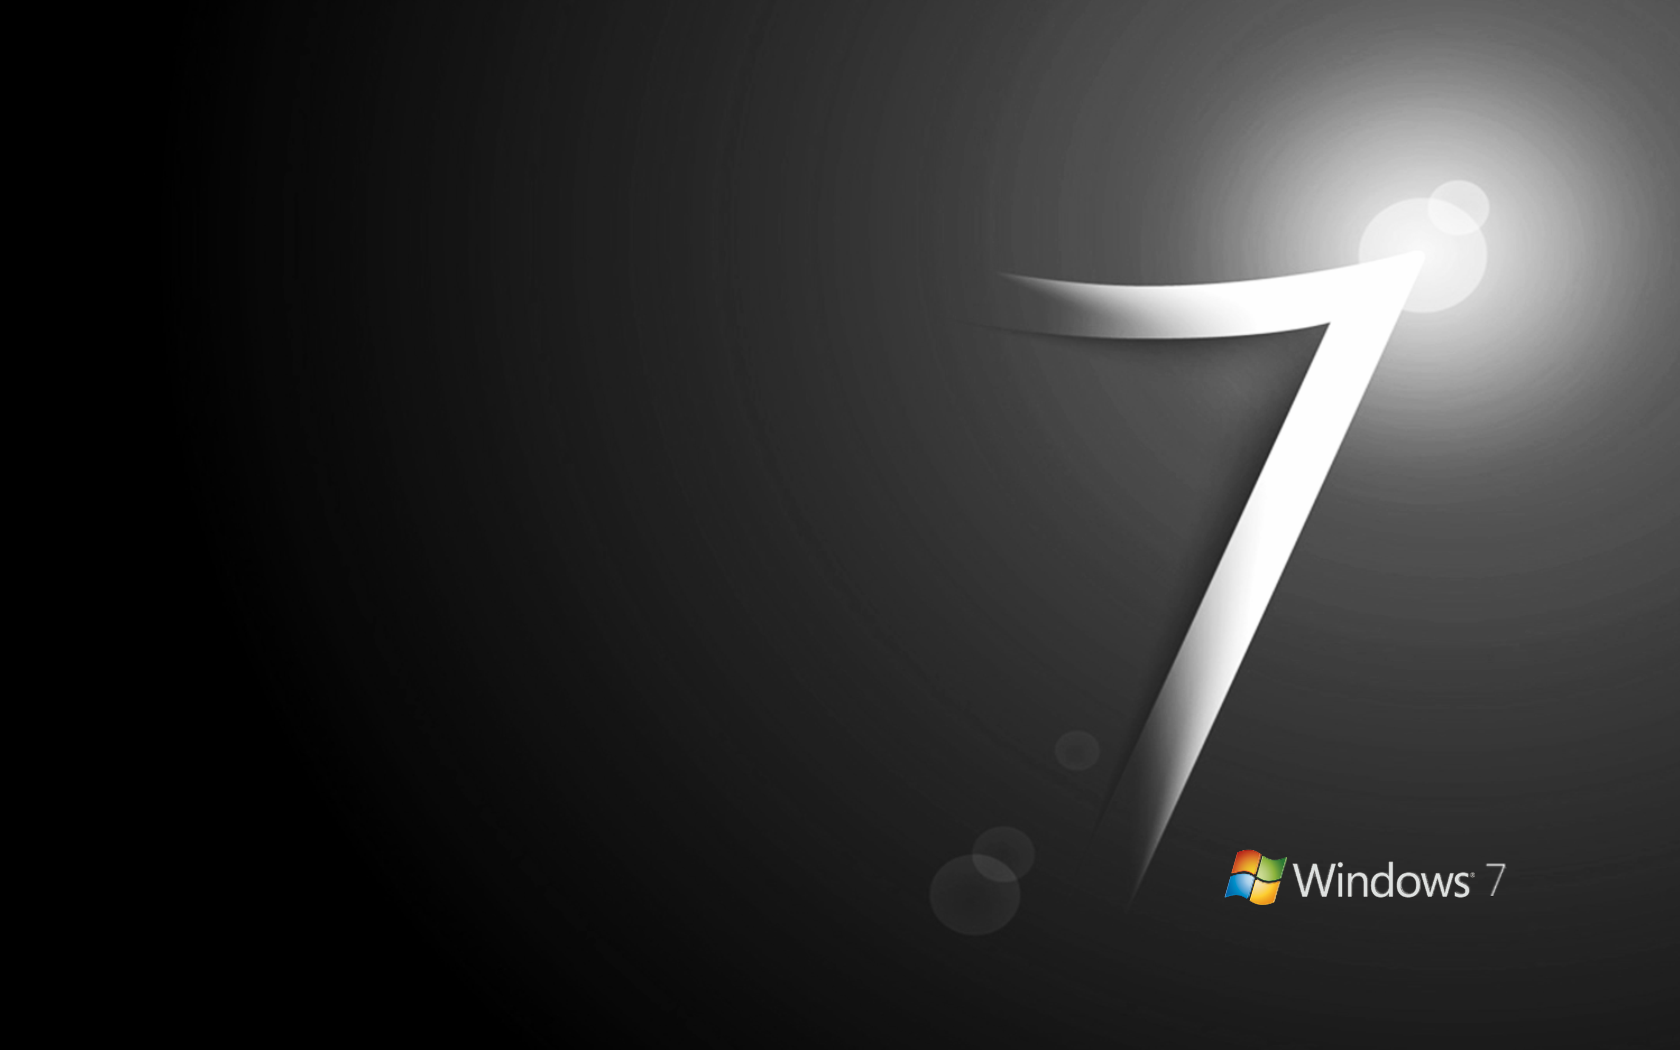 Cool Windows 7 Wallpapers - Wallpaper Cave